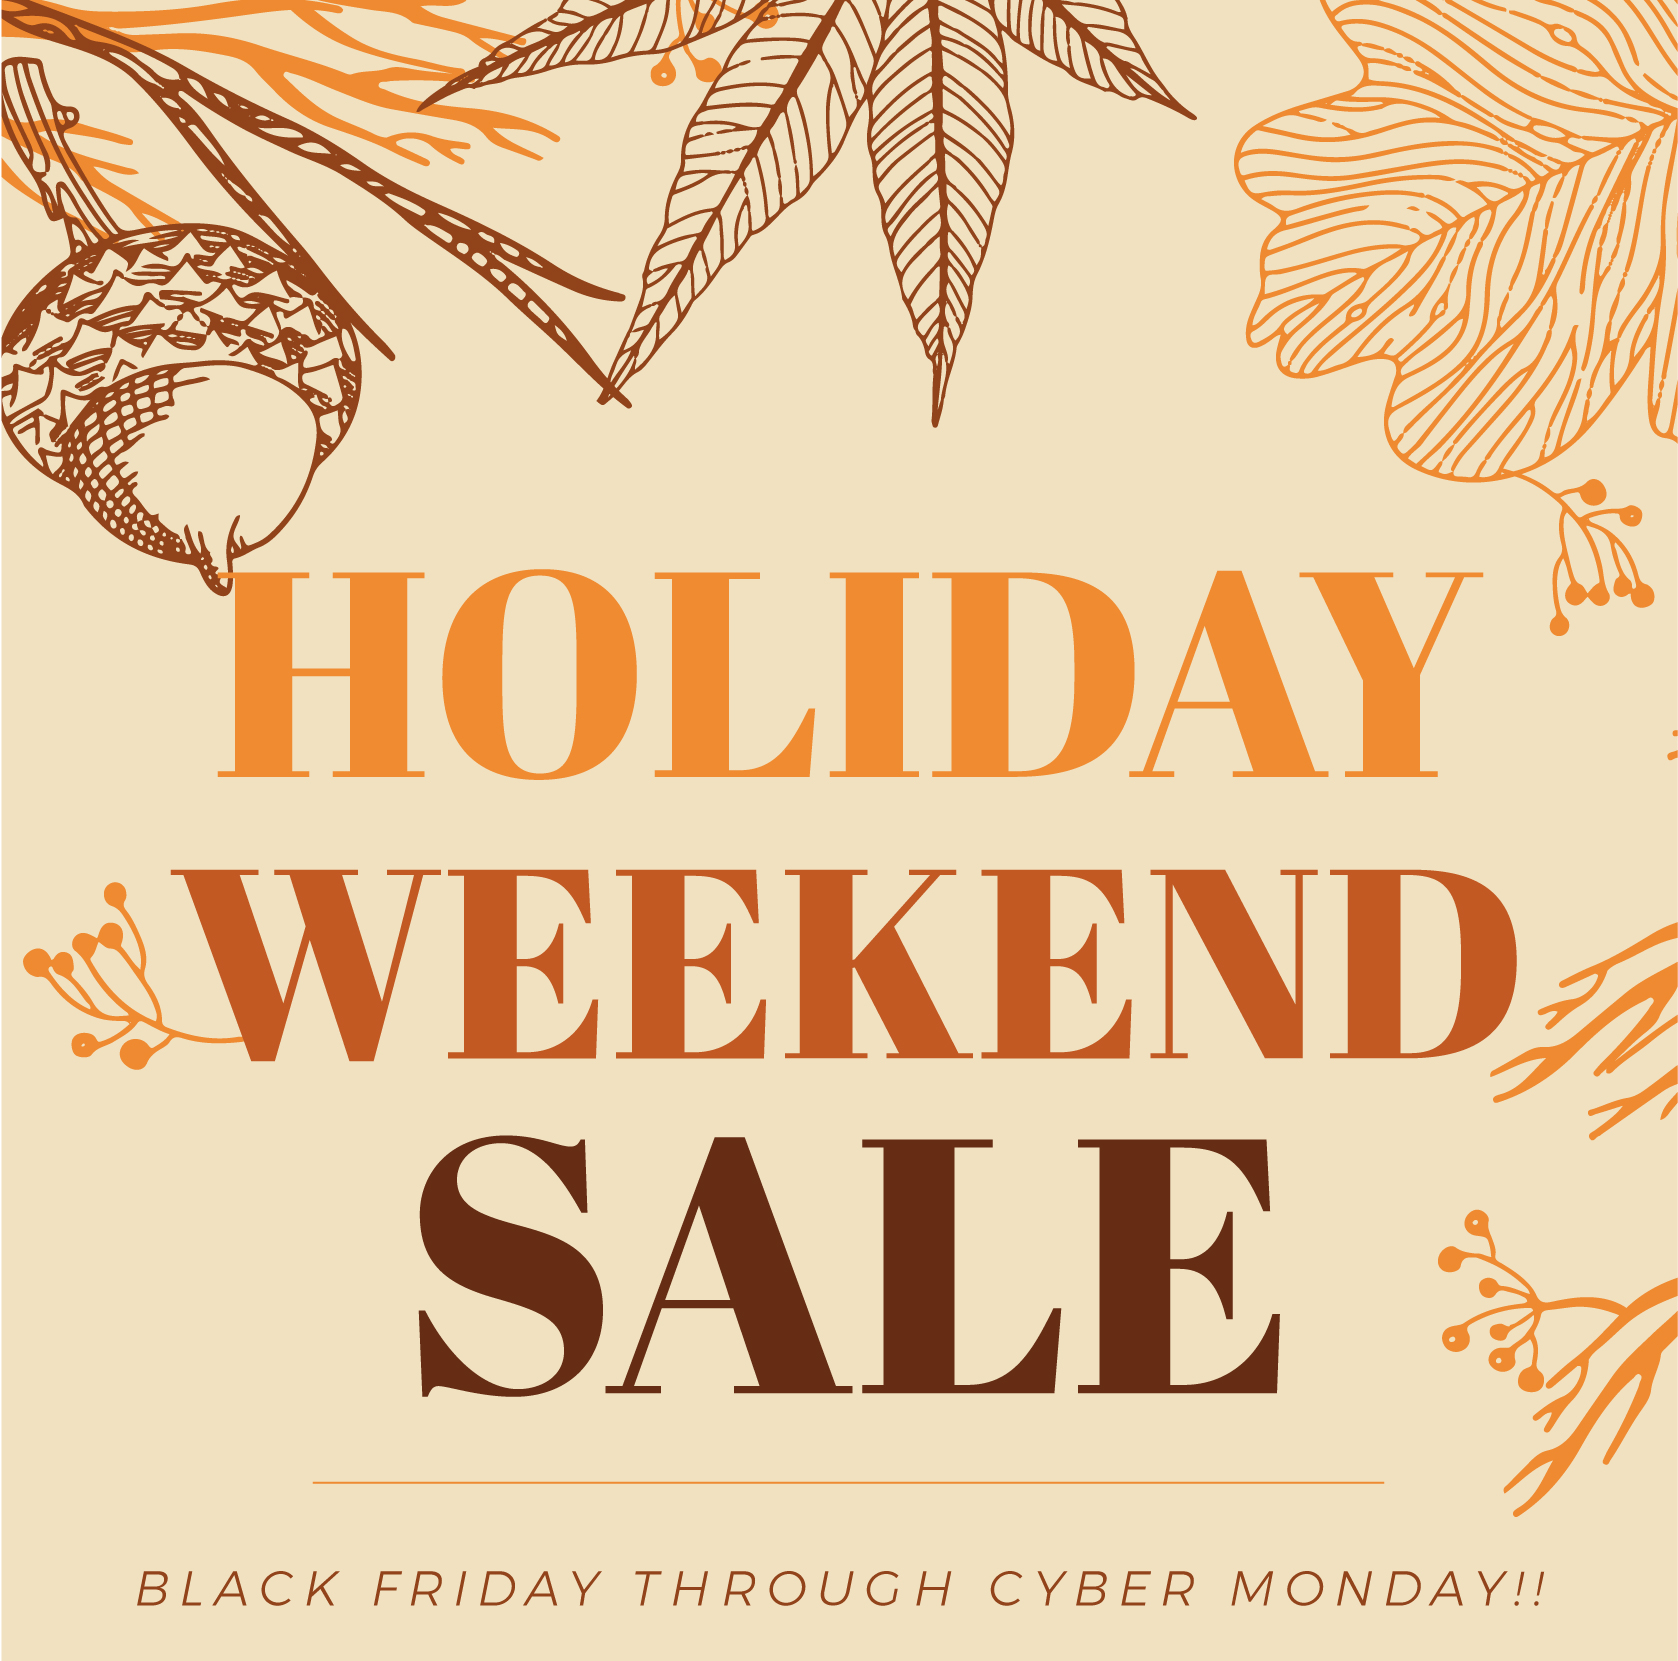 Enjoy up to 30% off the entire website now through Cyber Monday!! (Some exclusions apply)